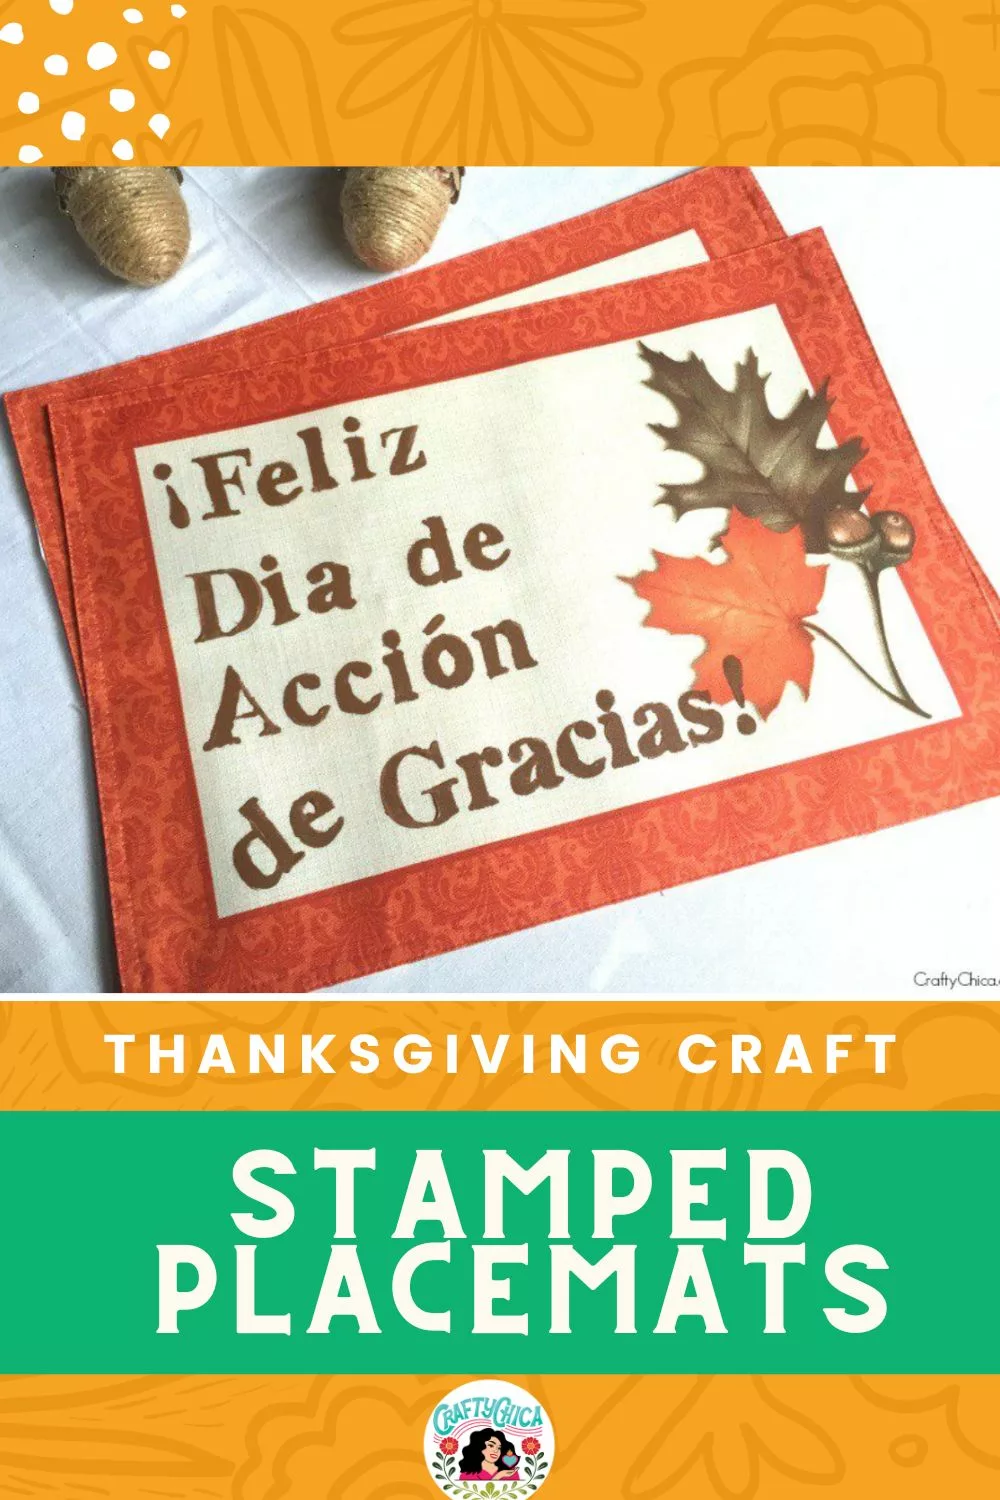 Hand stamped Thanksgiving placemats